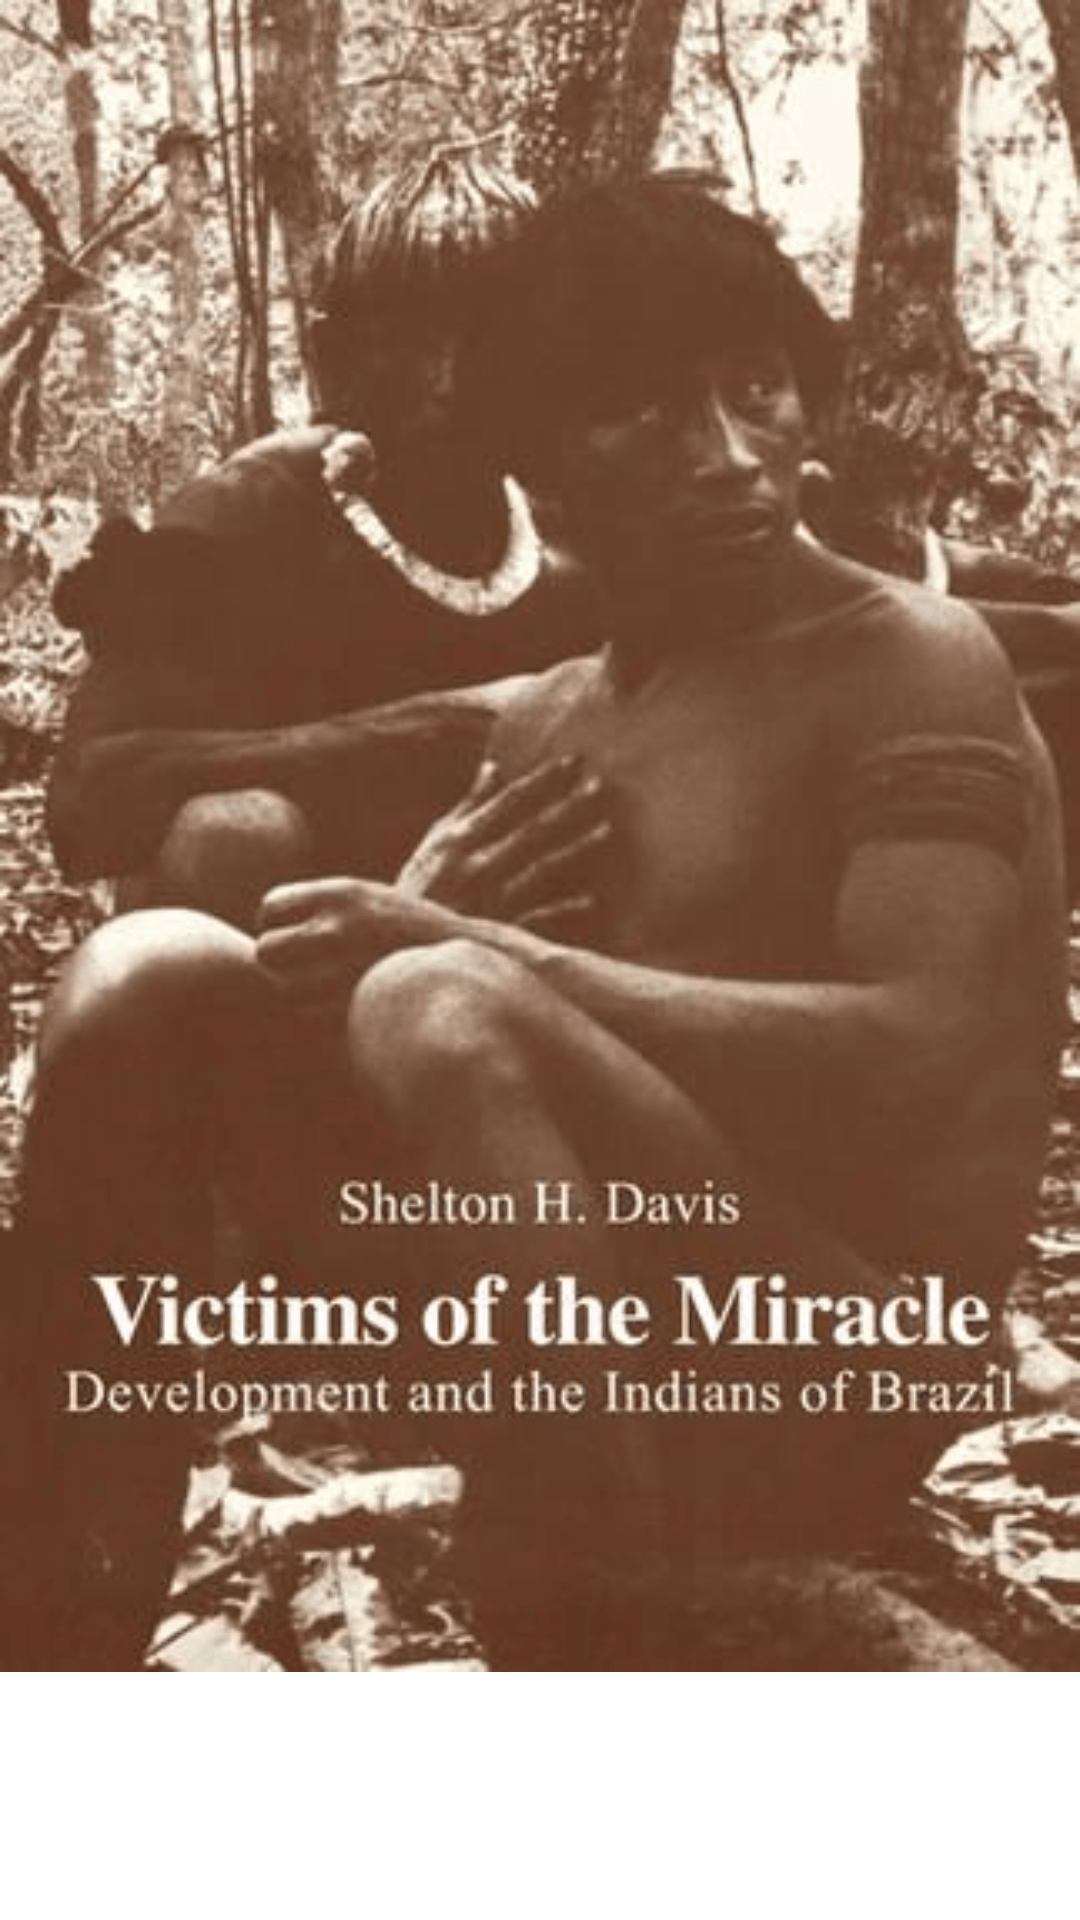 Victims of the Miracle: Development and the Indians of Brazil